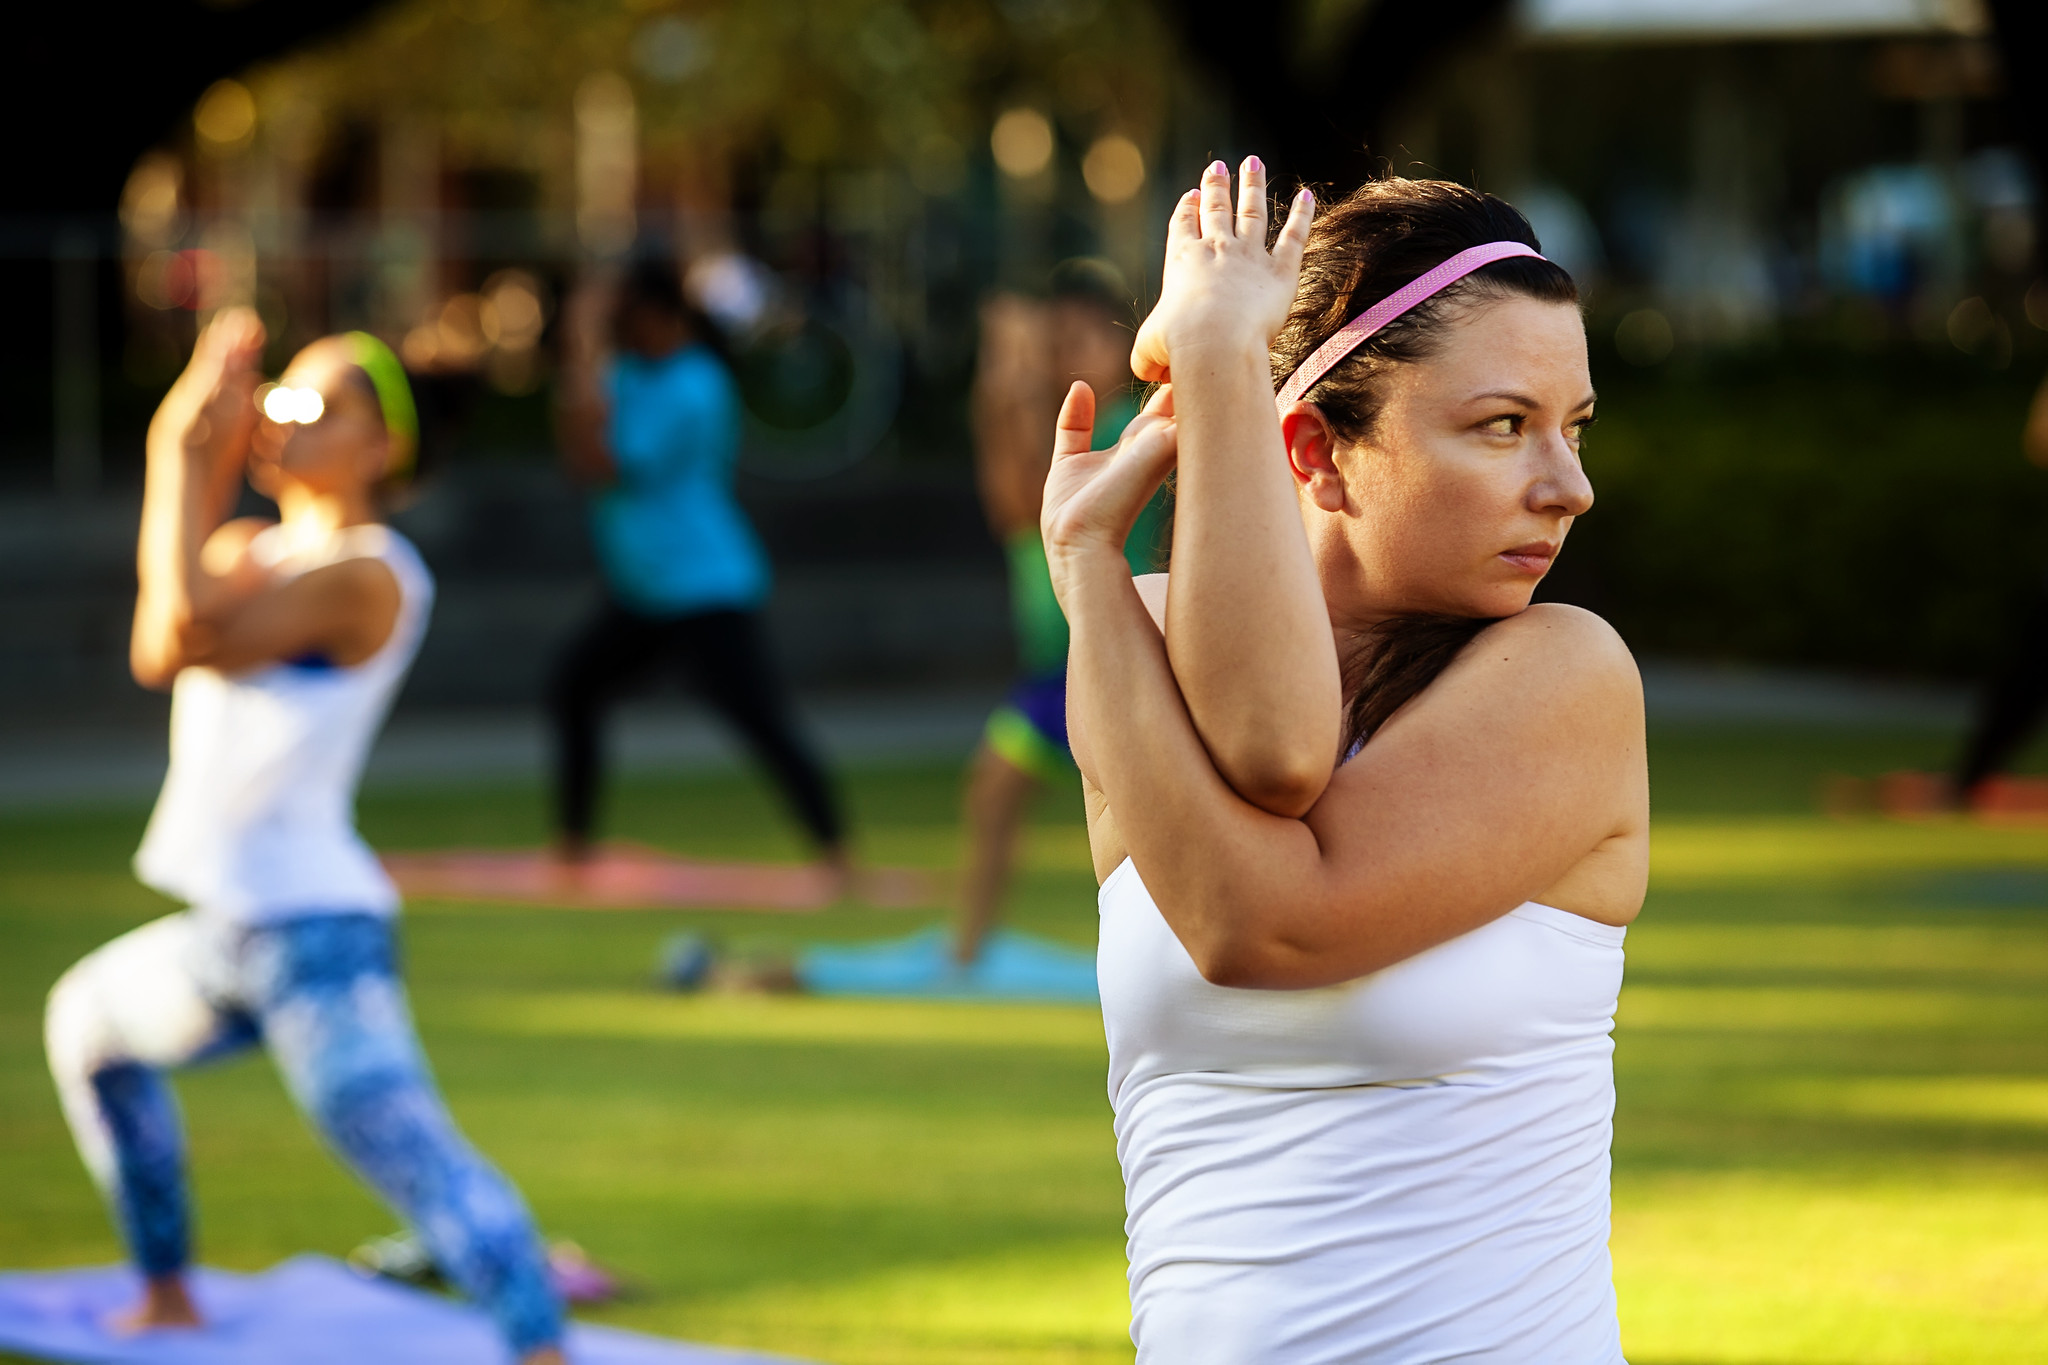 Hatha Yoga at Discovery Green presented by The J.W. Couch Foundation